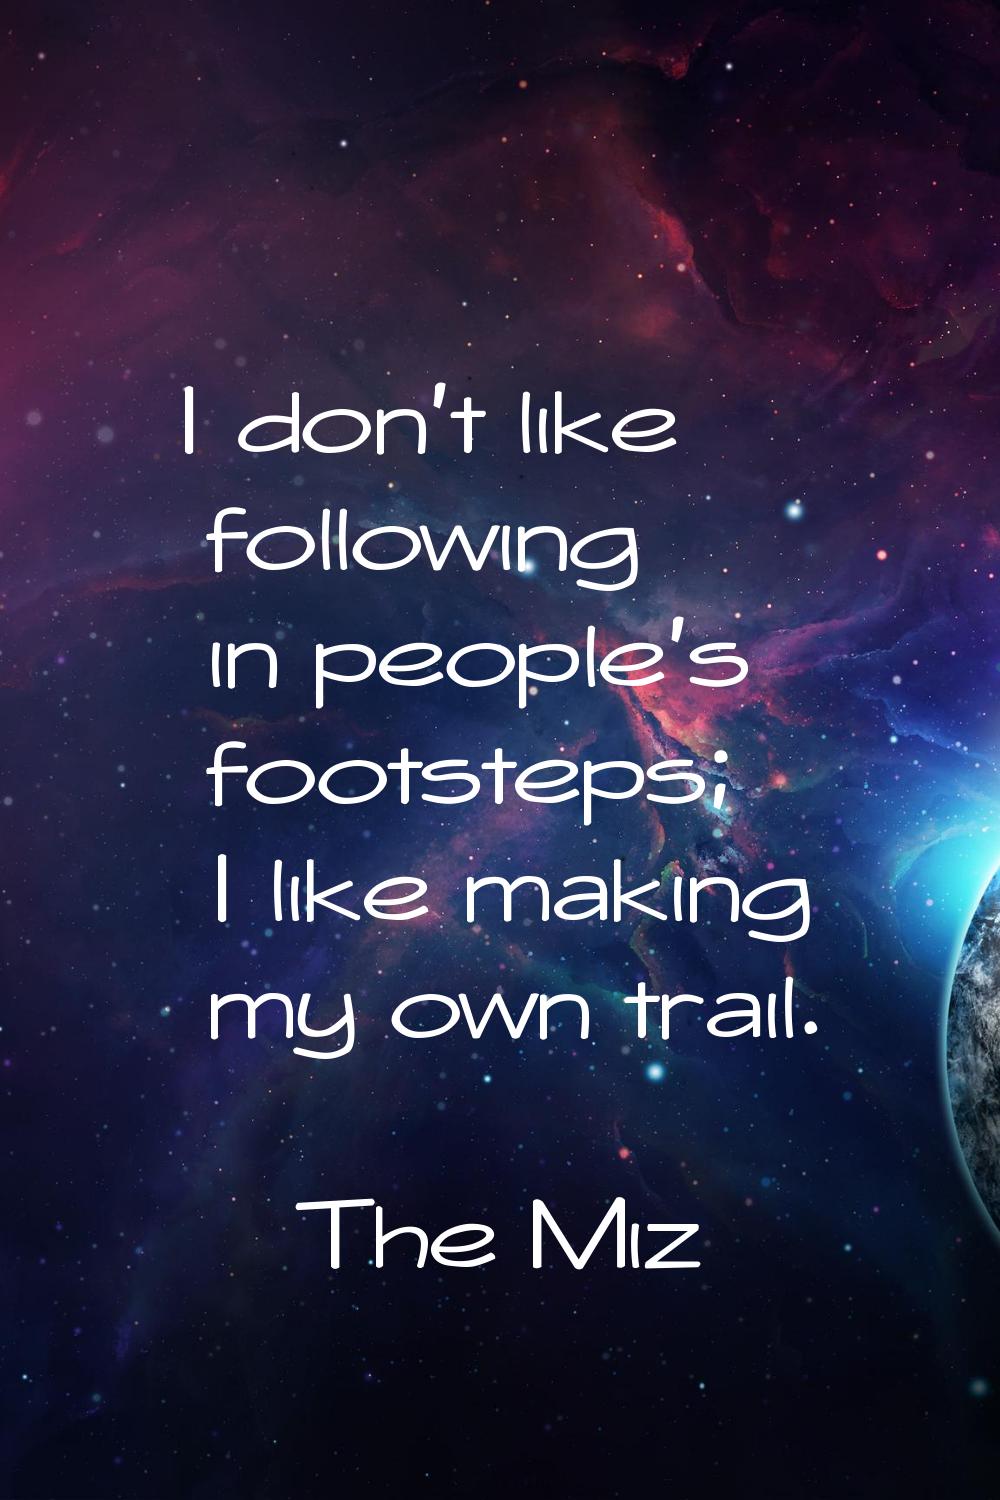 I don't like following in people's footsteps; I like making my own trail.